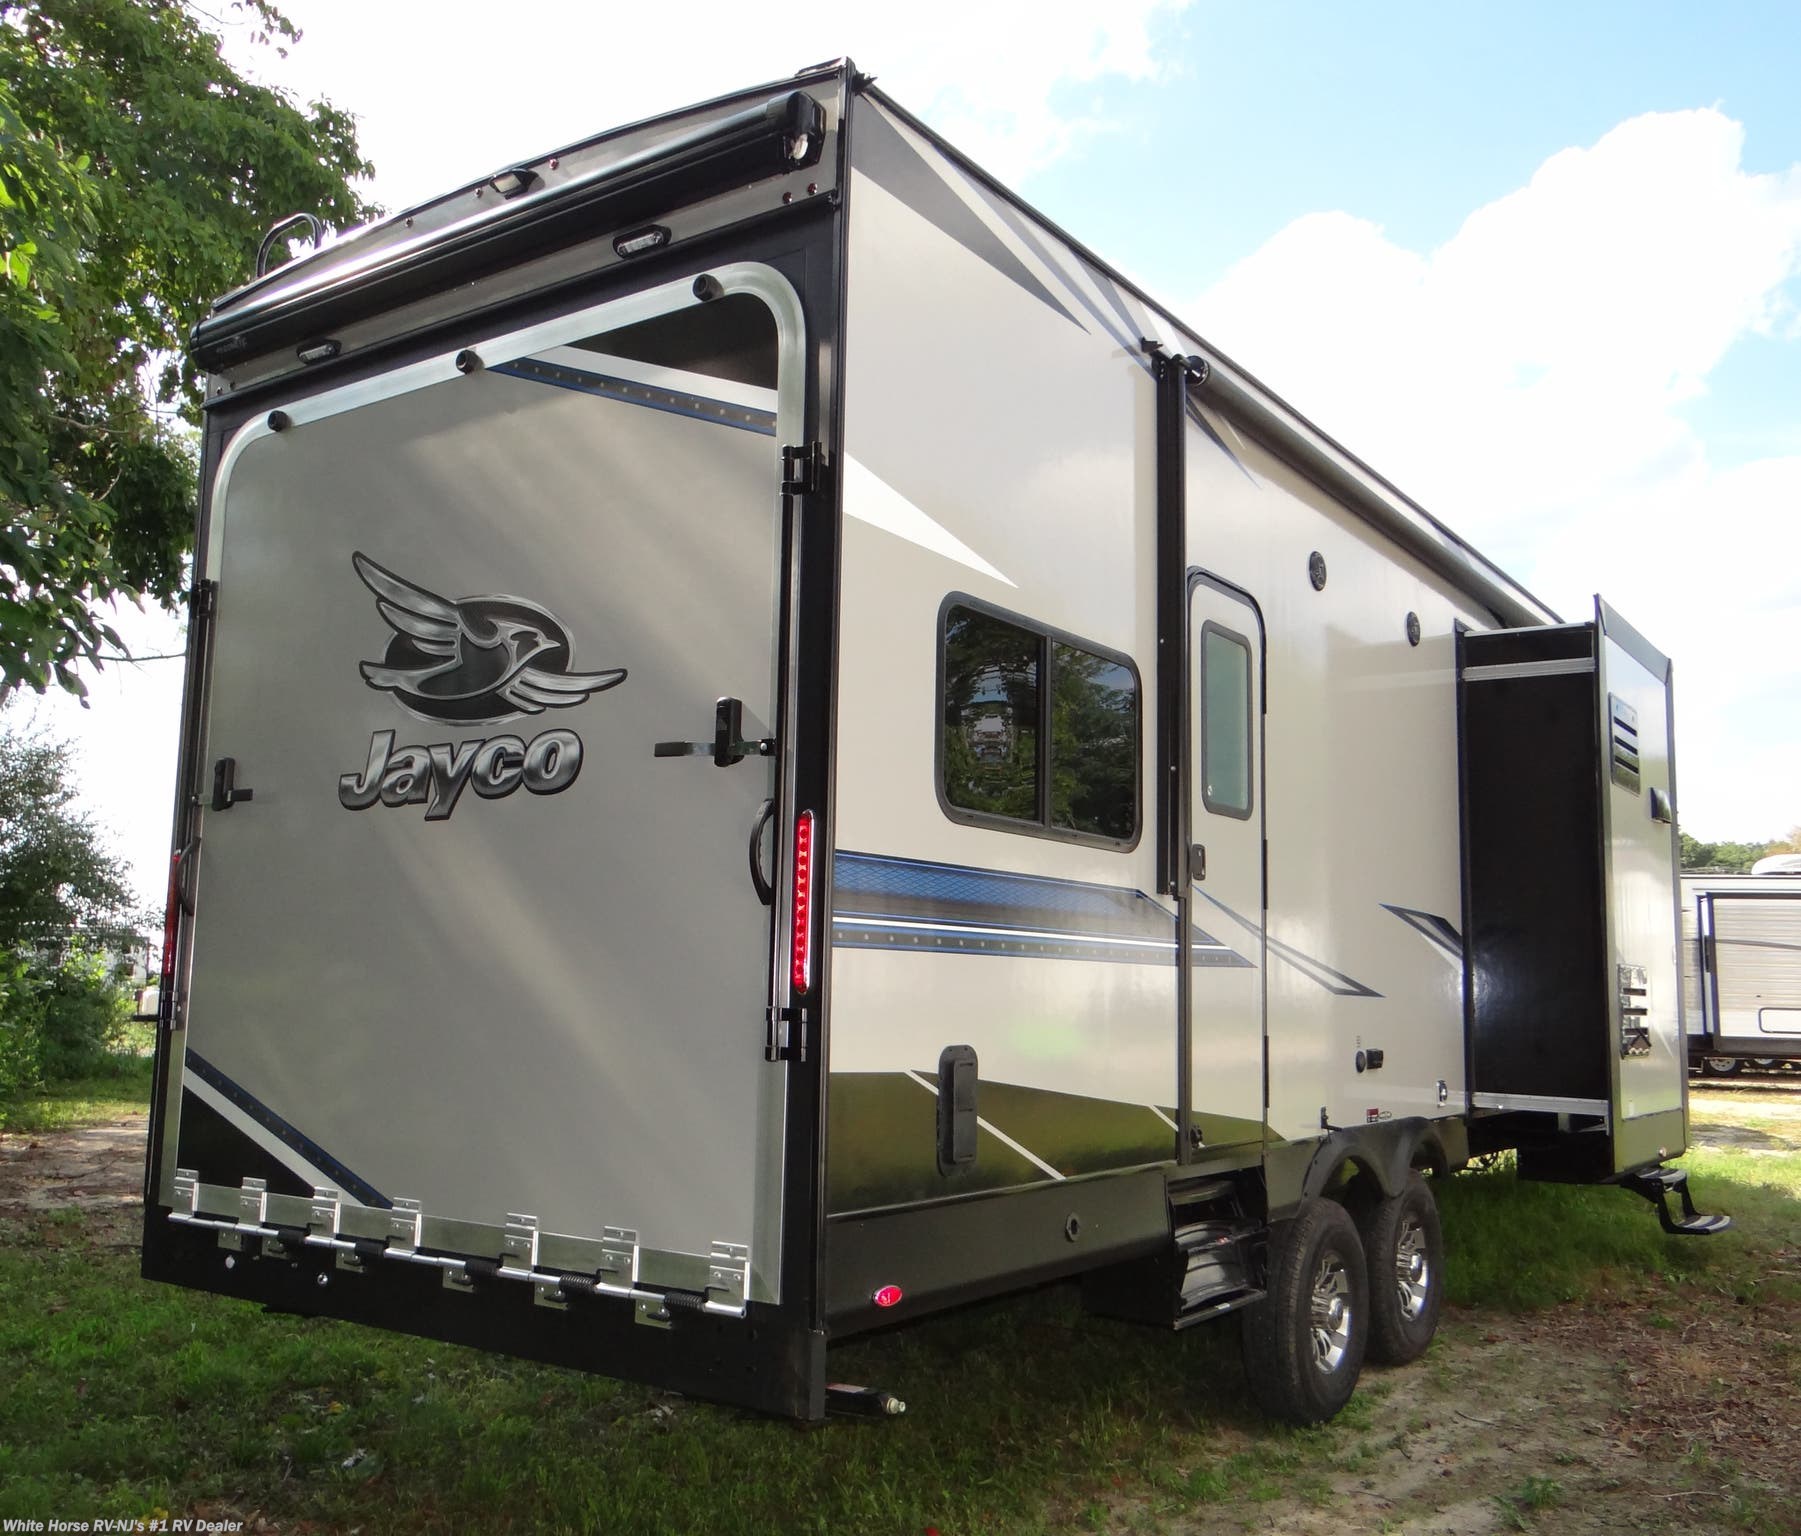 23 foot travel trailers with slide out